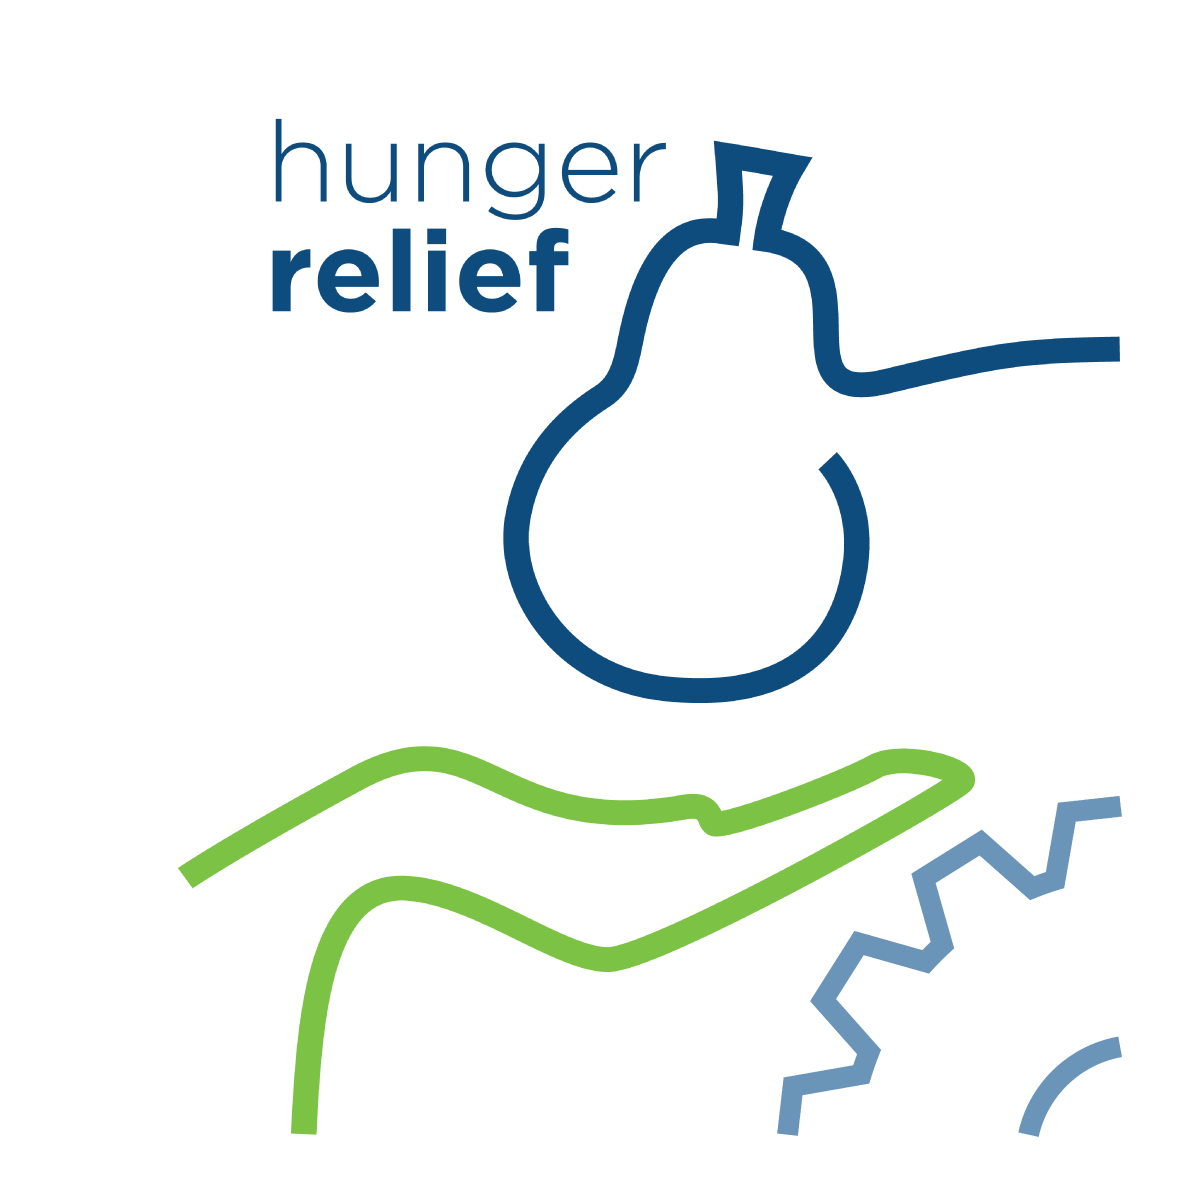 Hunger relief logo